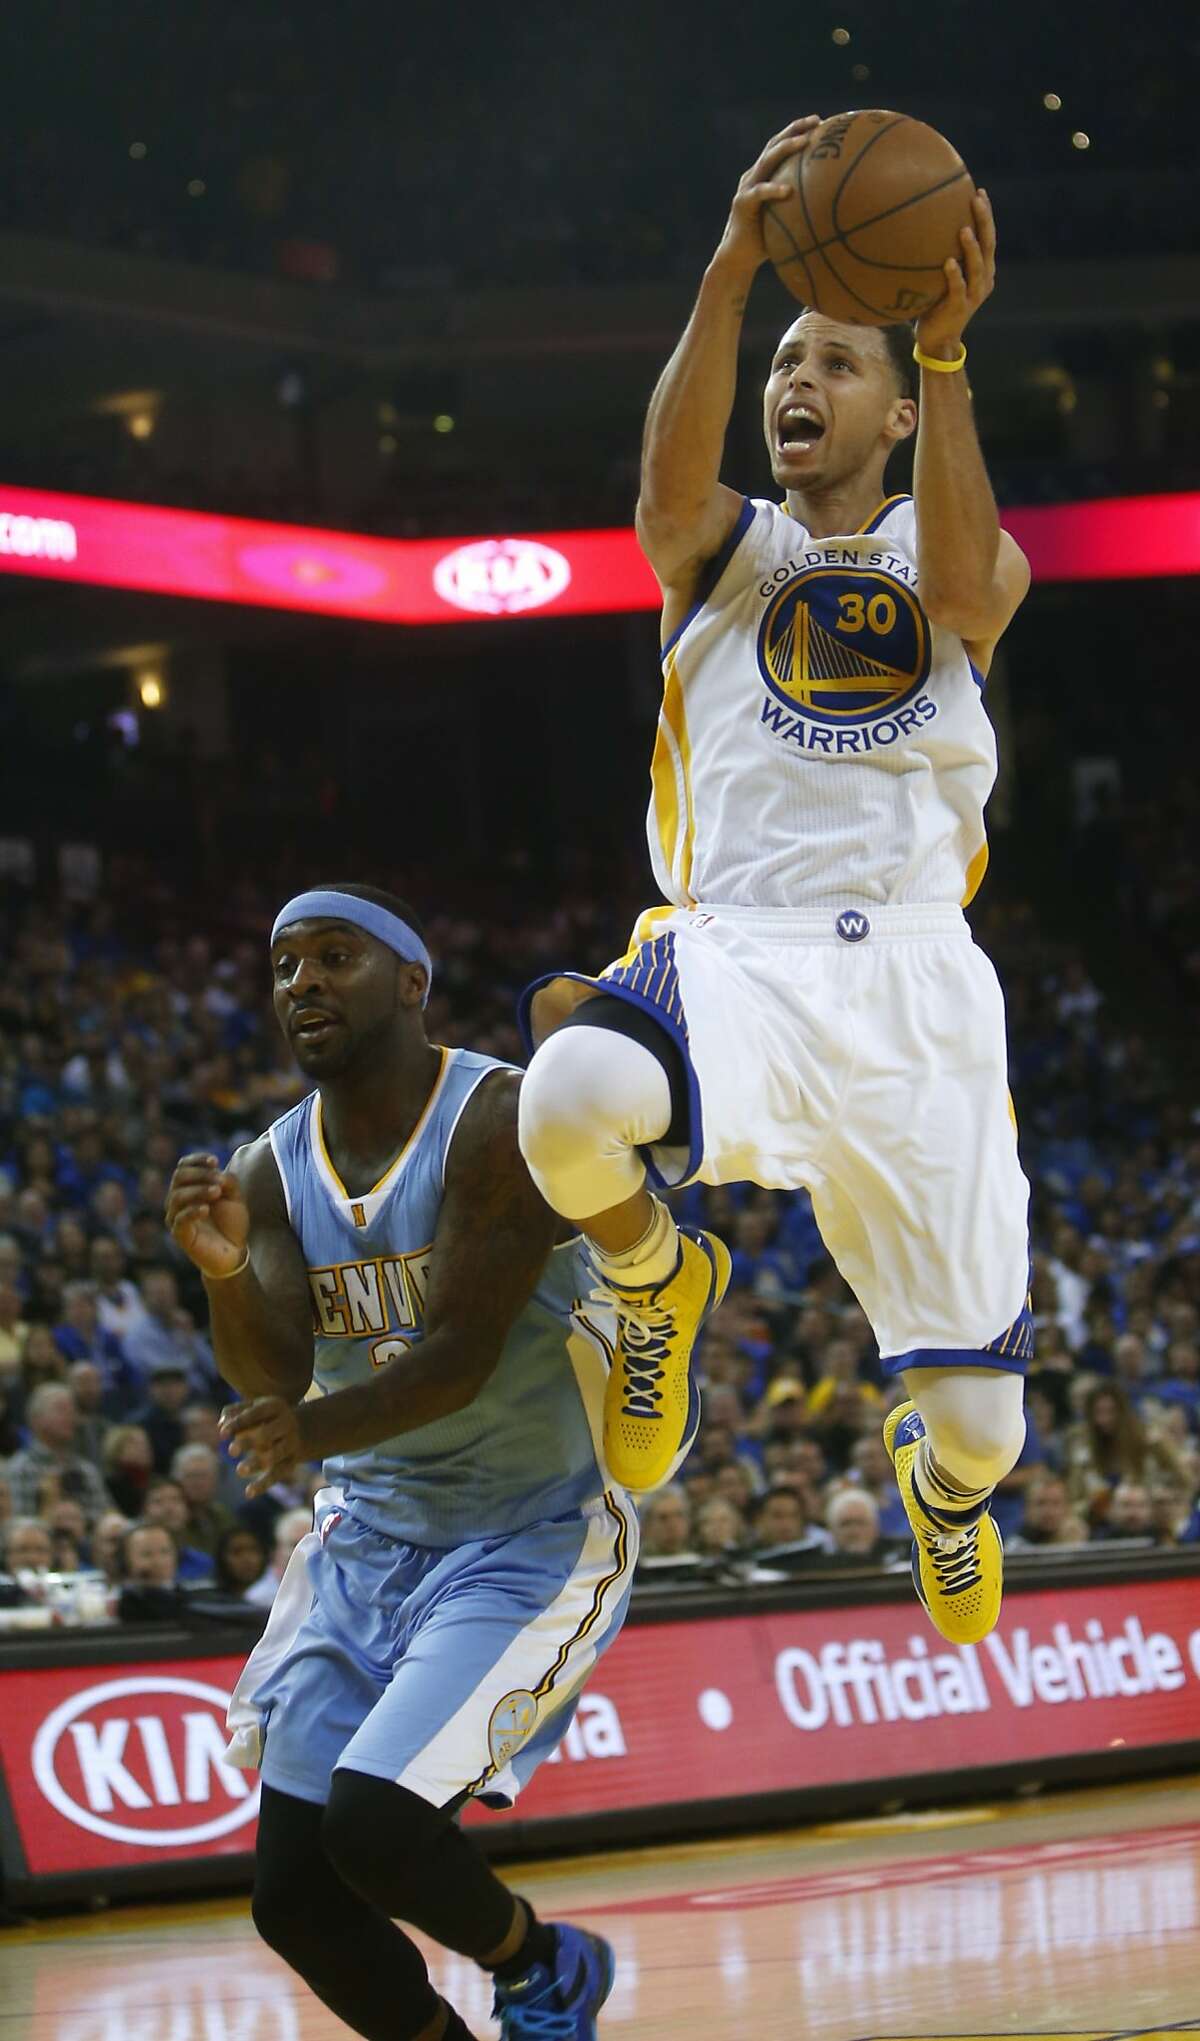 Golden State Warriors' Stephen Curry scores against Denver Nuggets' Ty Lawson during NBA game at Oracle Arena in Oakland, Calif., on Wednesday, April 15, 2015.